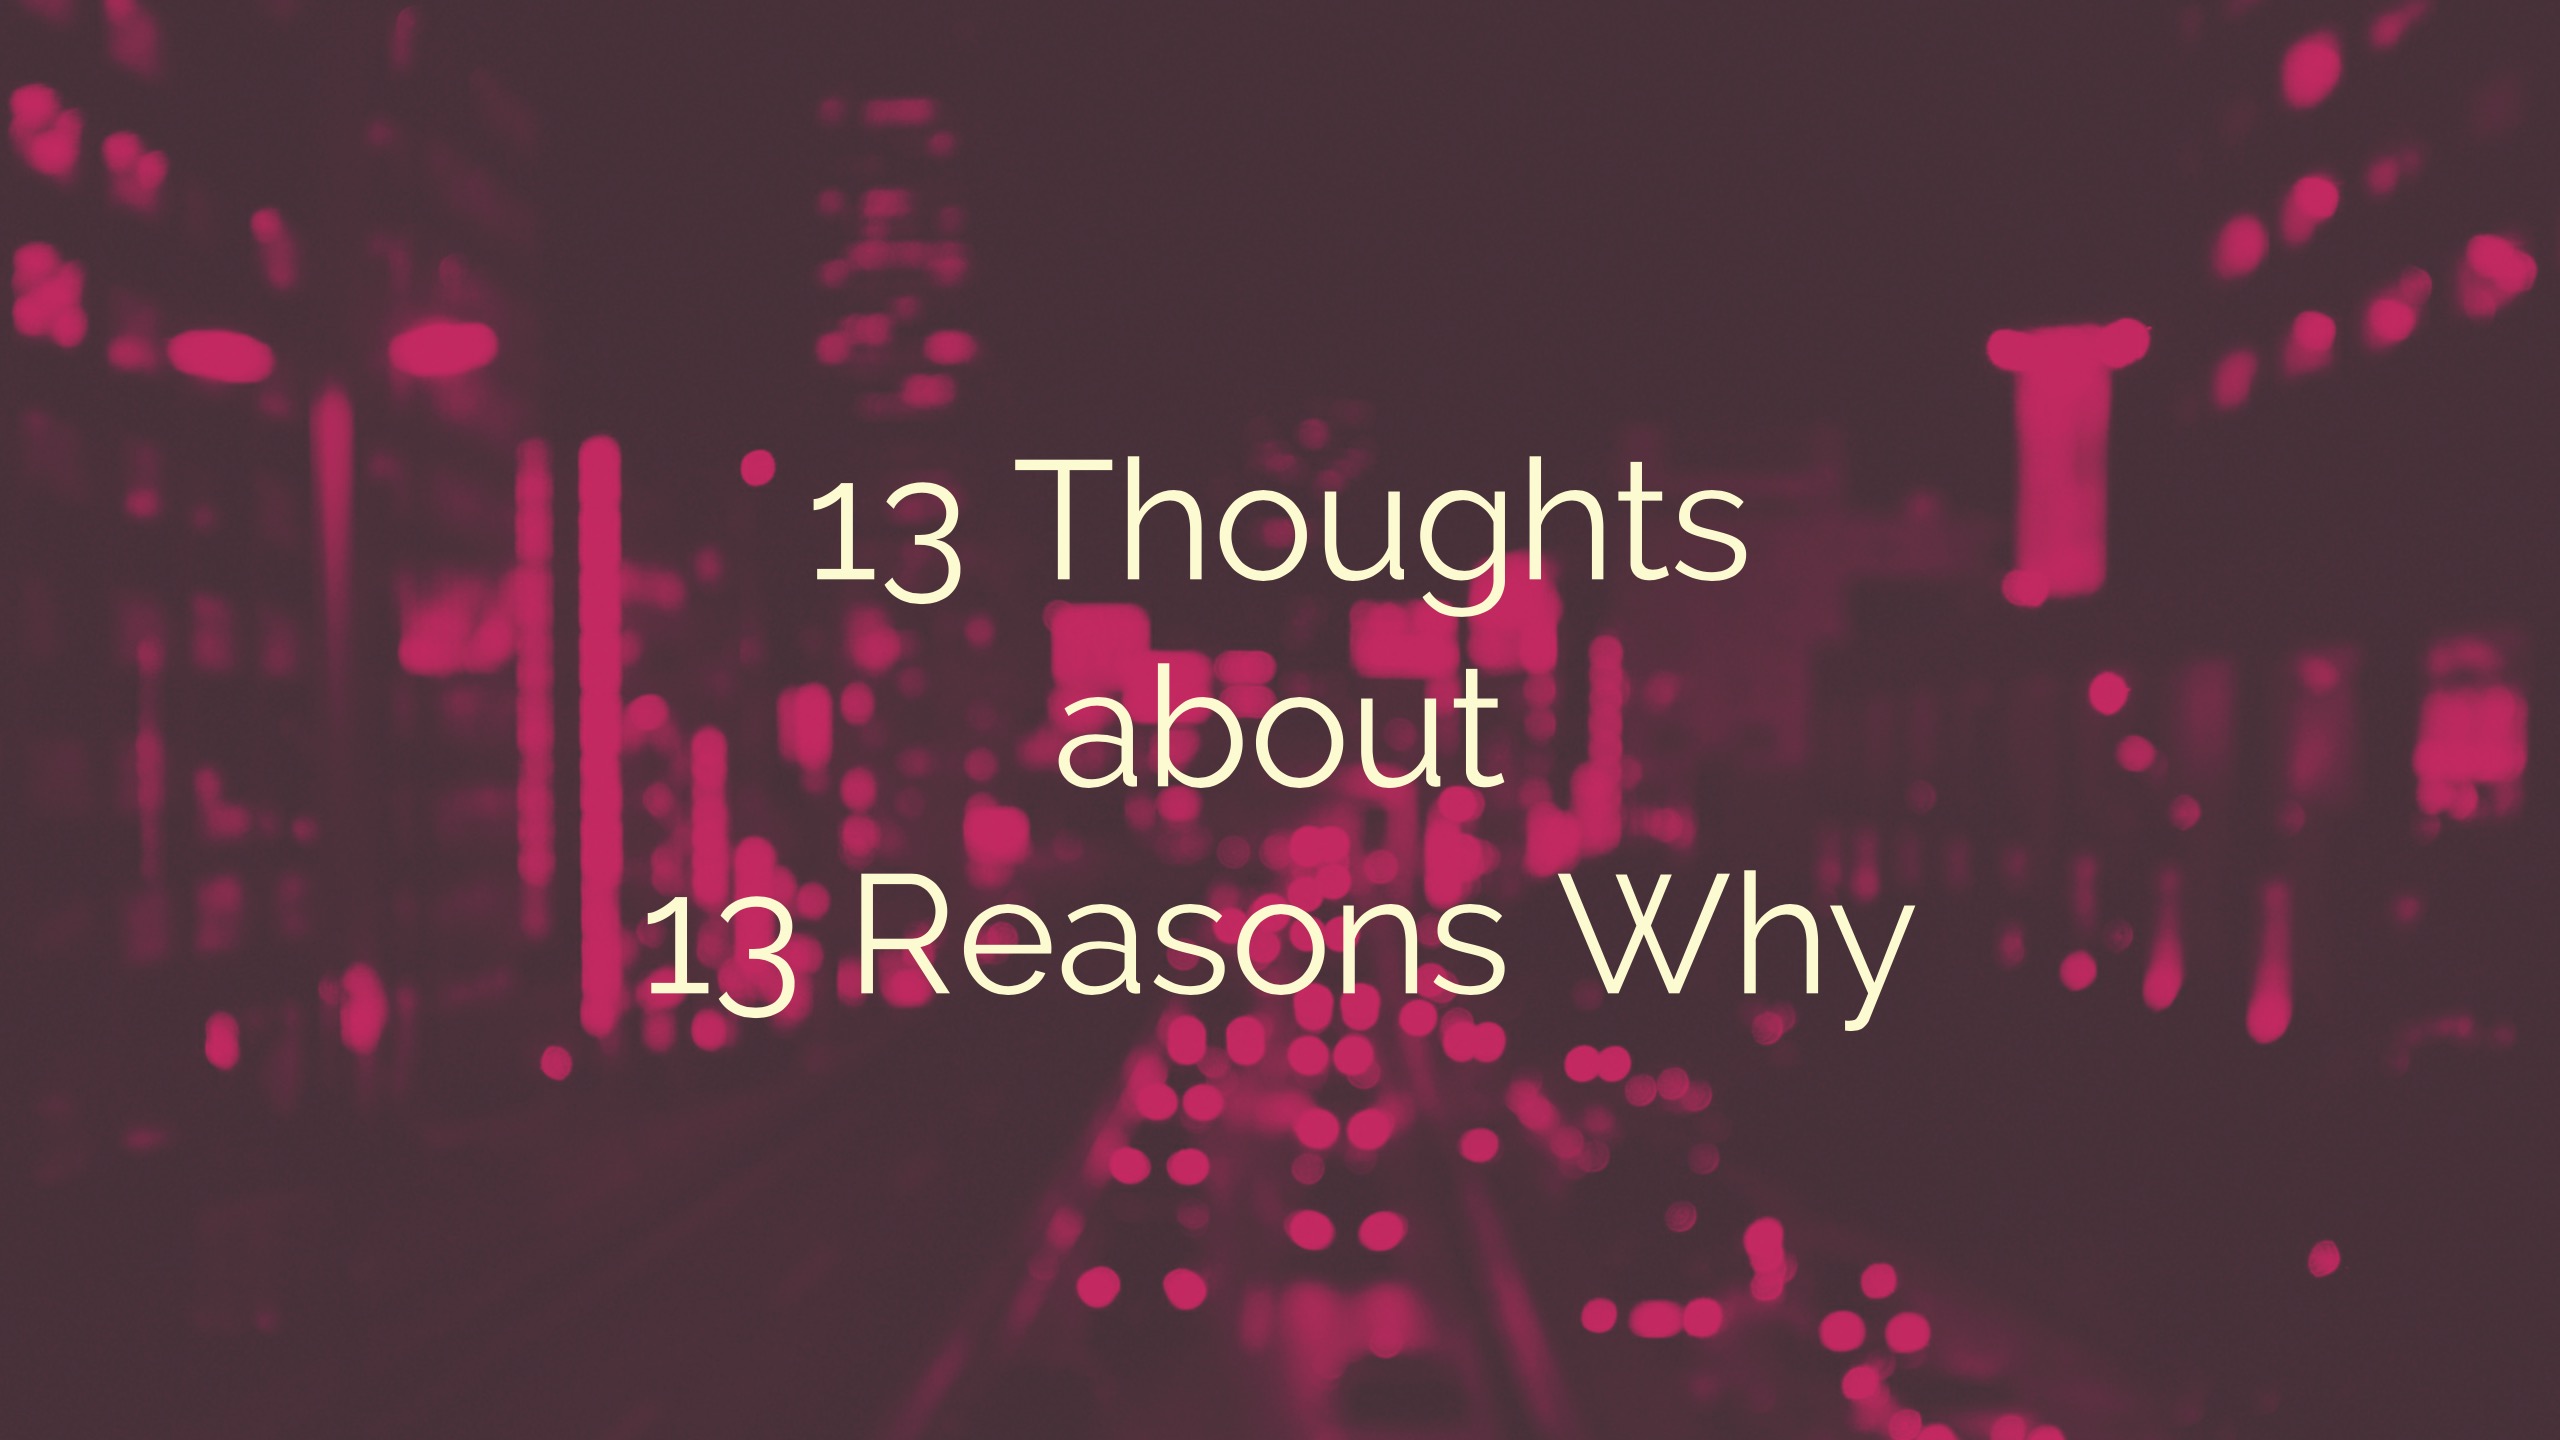 13 Thoughts on 13 Reasons Why